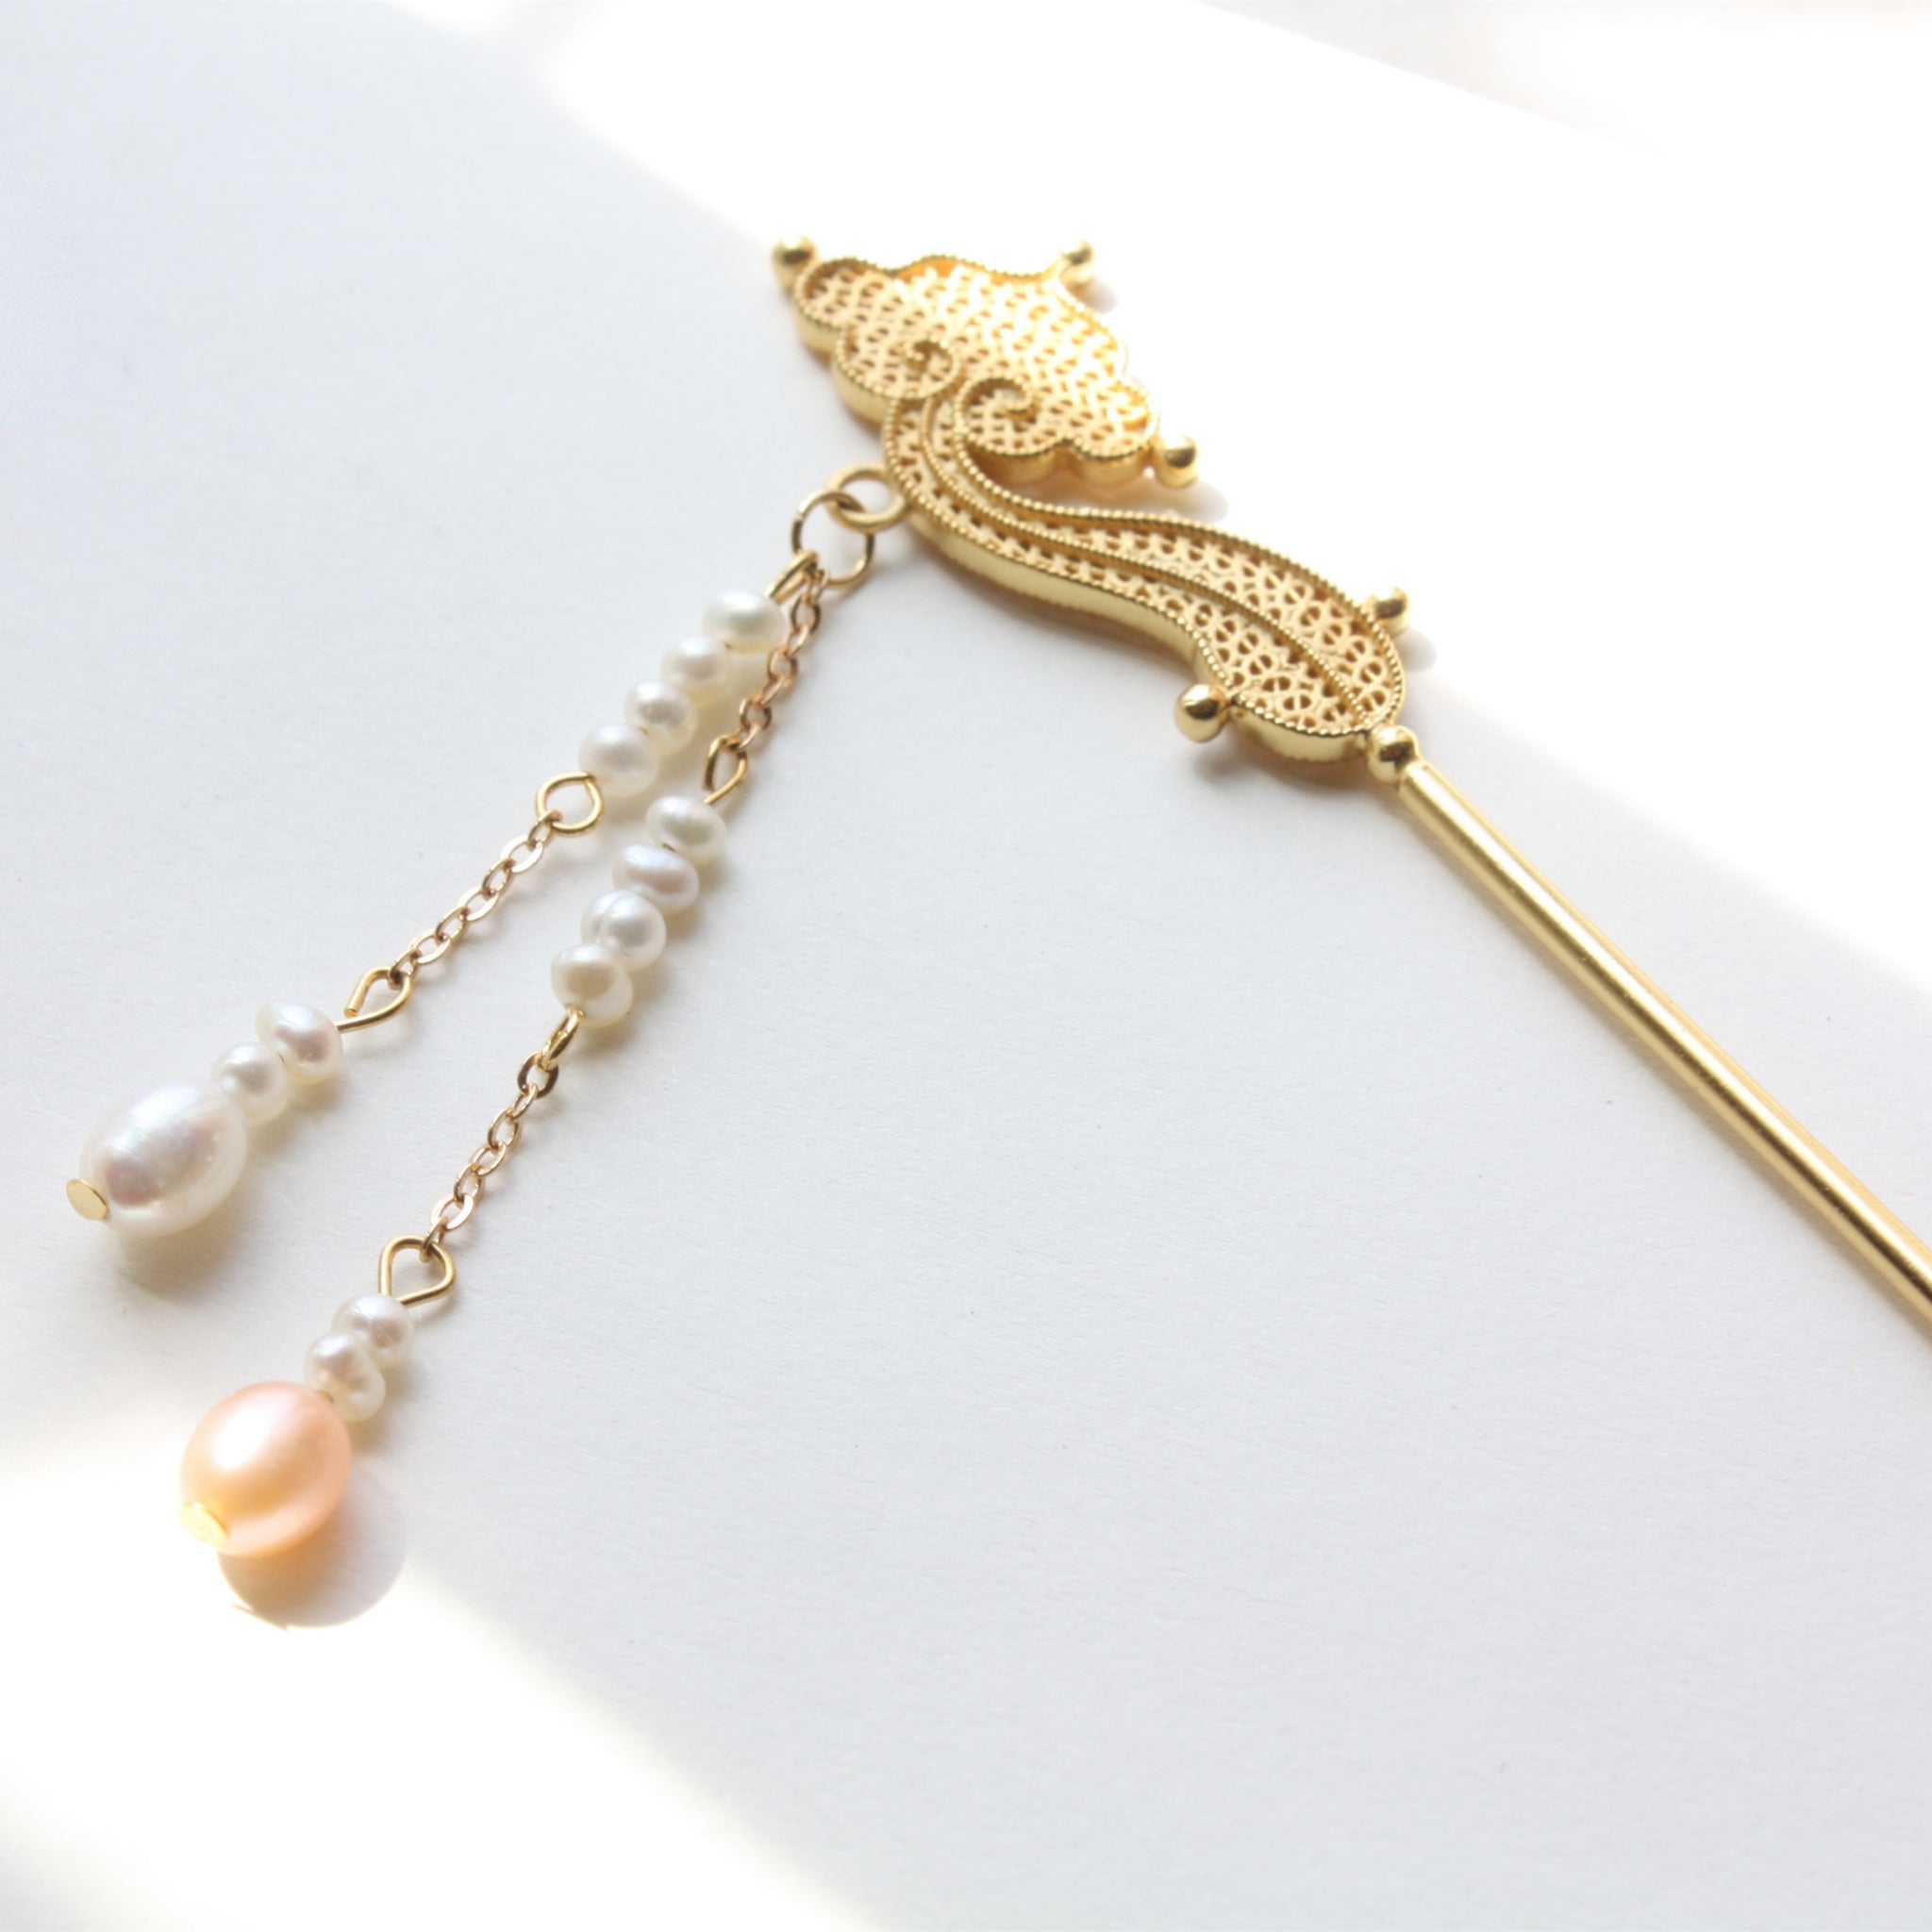 Traditional Chinese Silver Gilded Ruyi Hairpin with Tassels